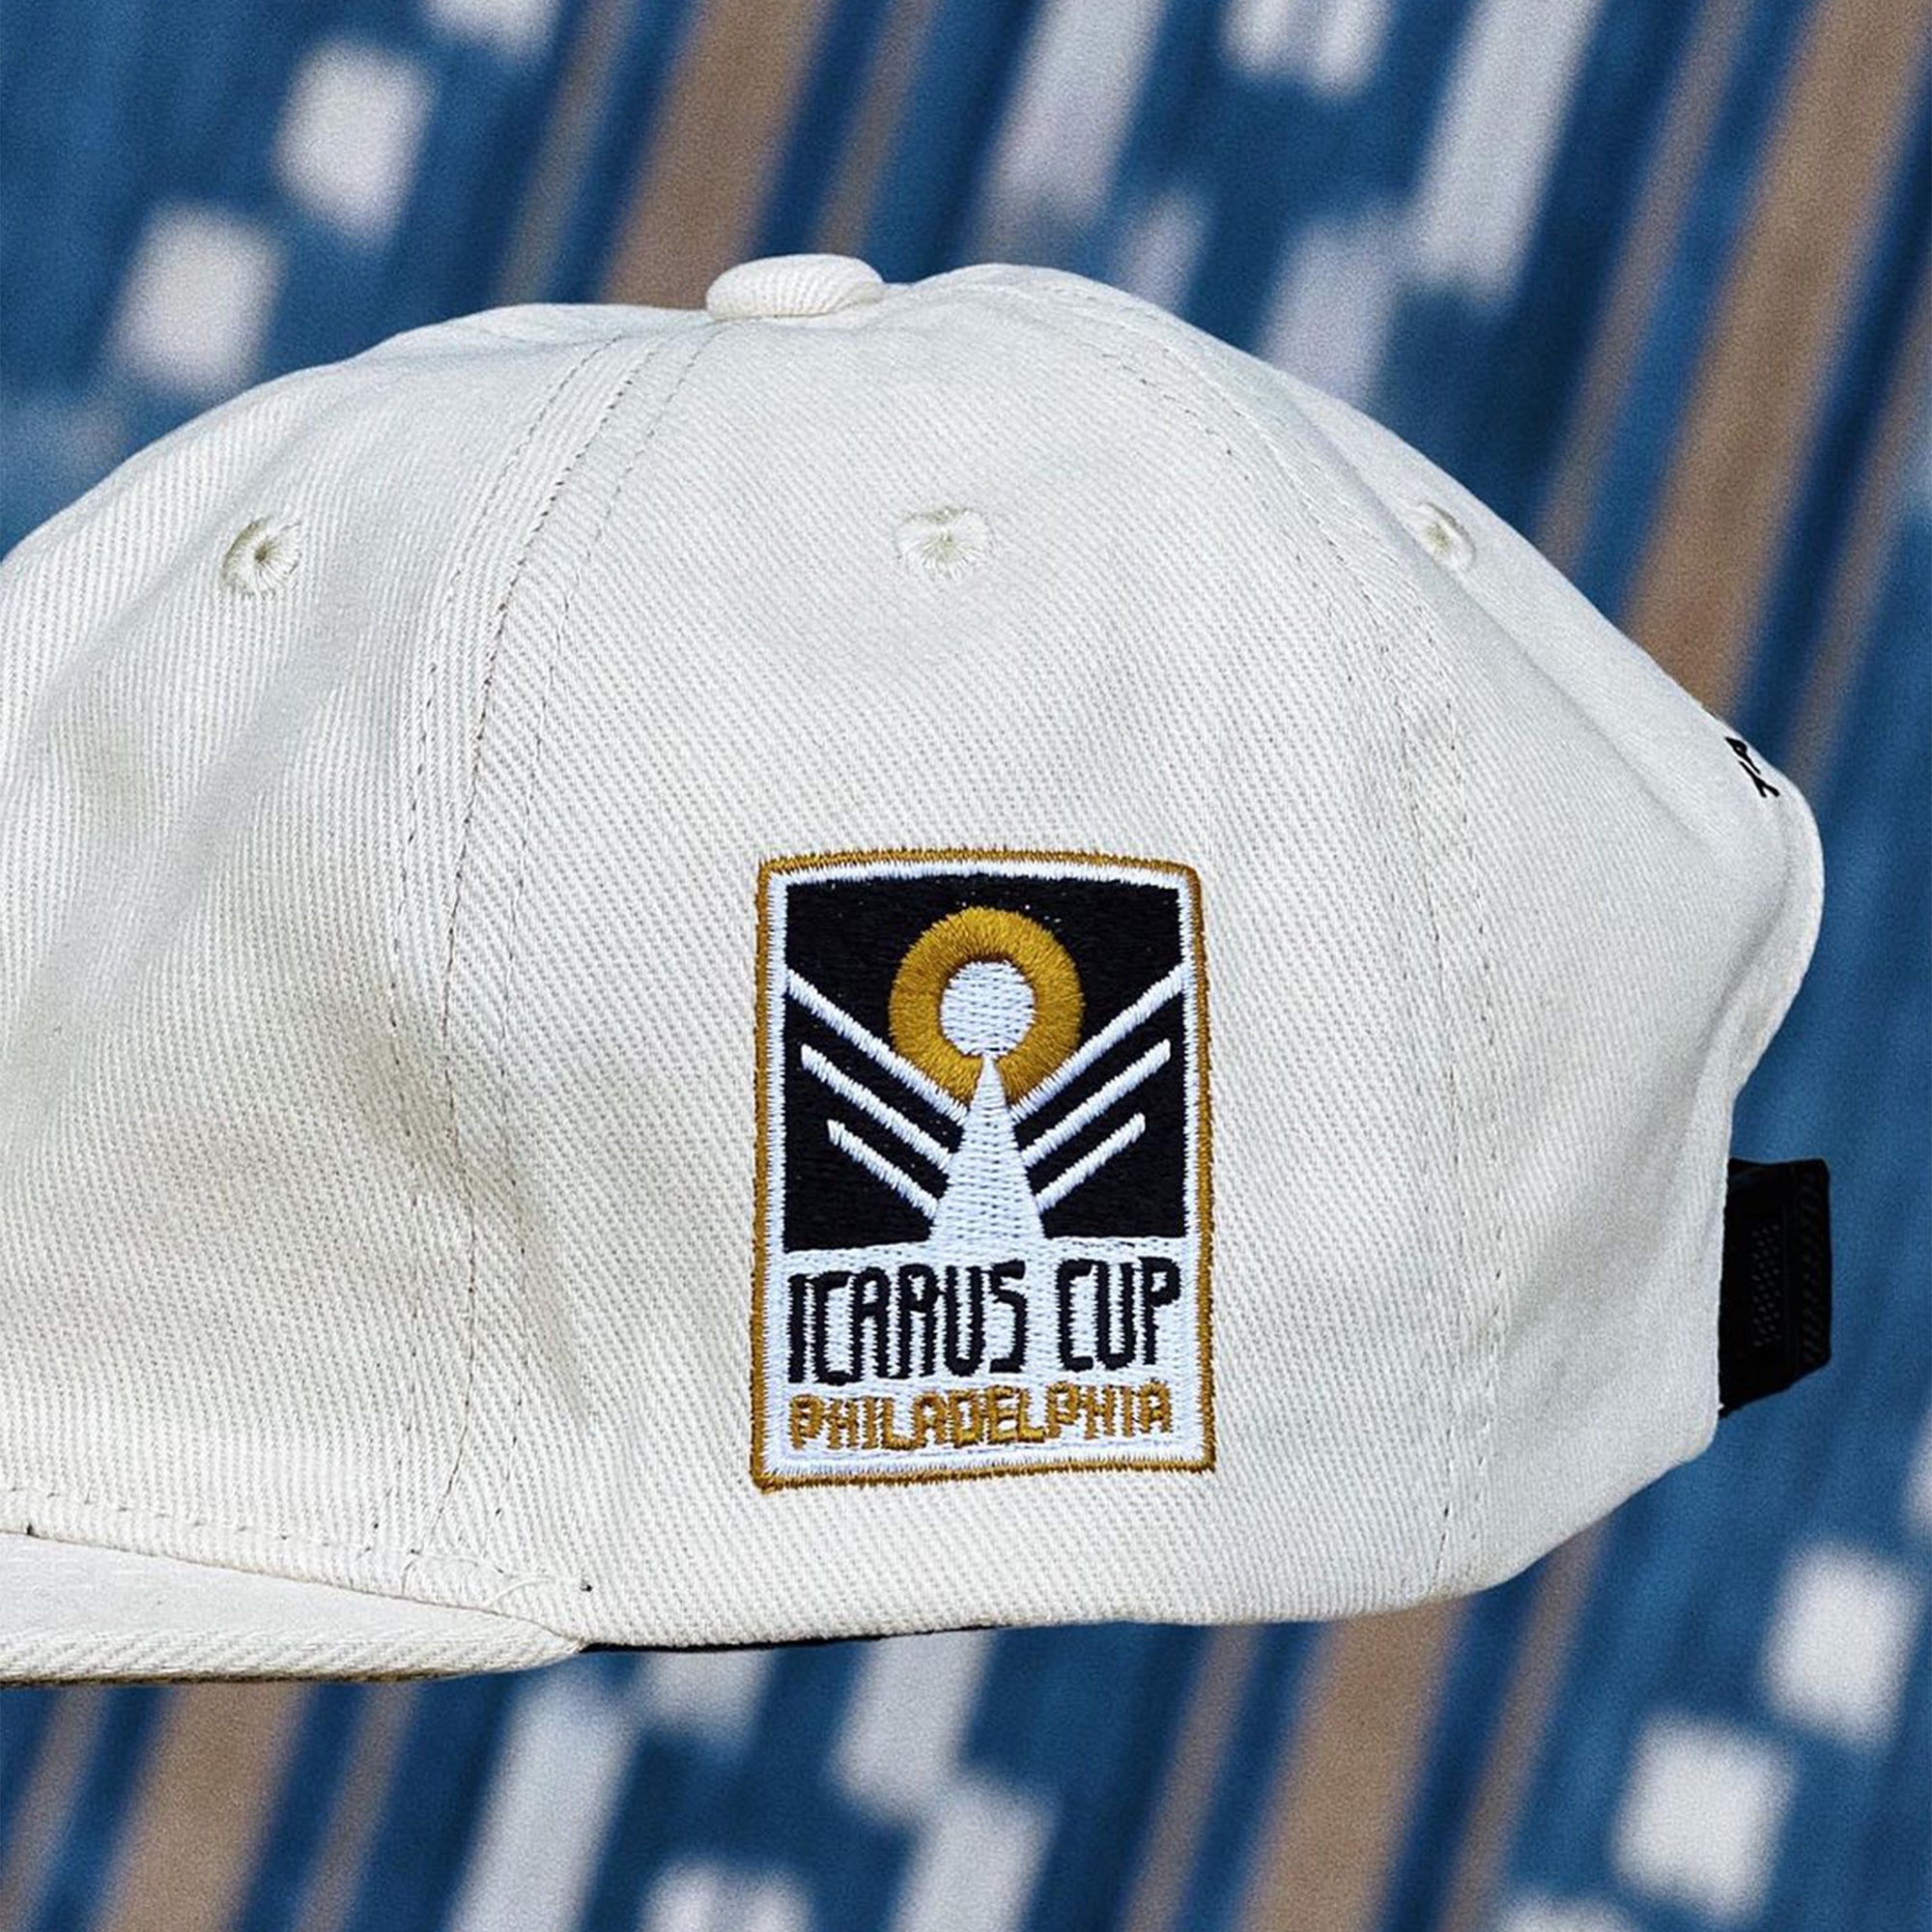 25 LIMITED EDITION Icarus Cup Hats by Talisman